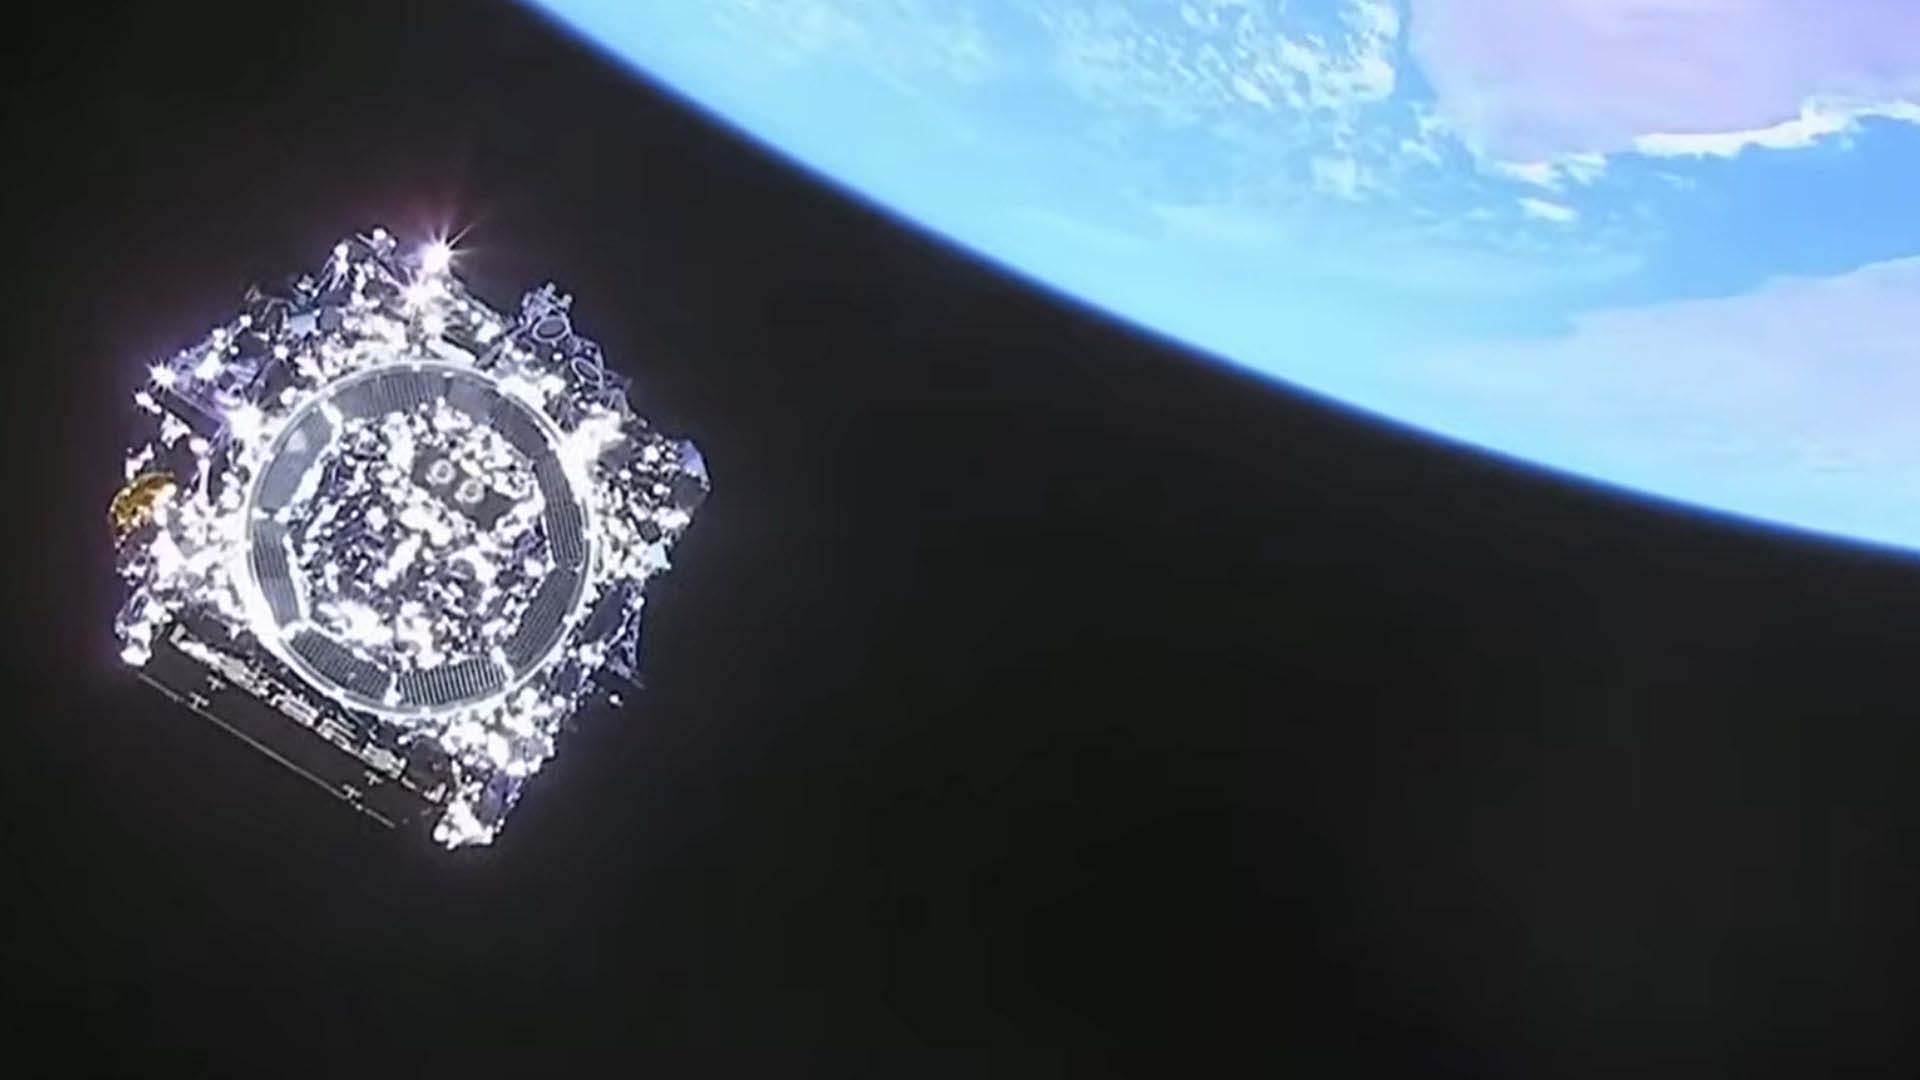 Our last view of Webb before it left Earth orbit for L2, as seen by a camera on the rocket fairing.